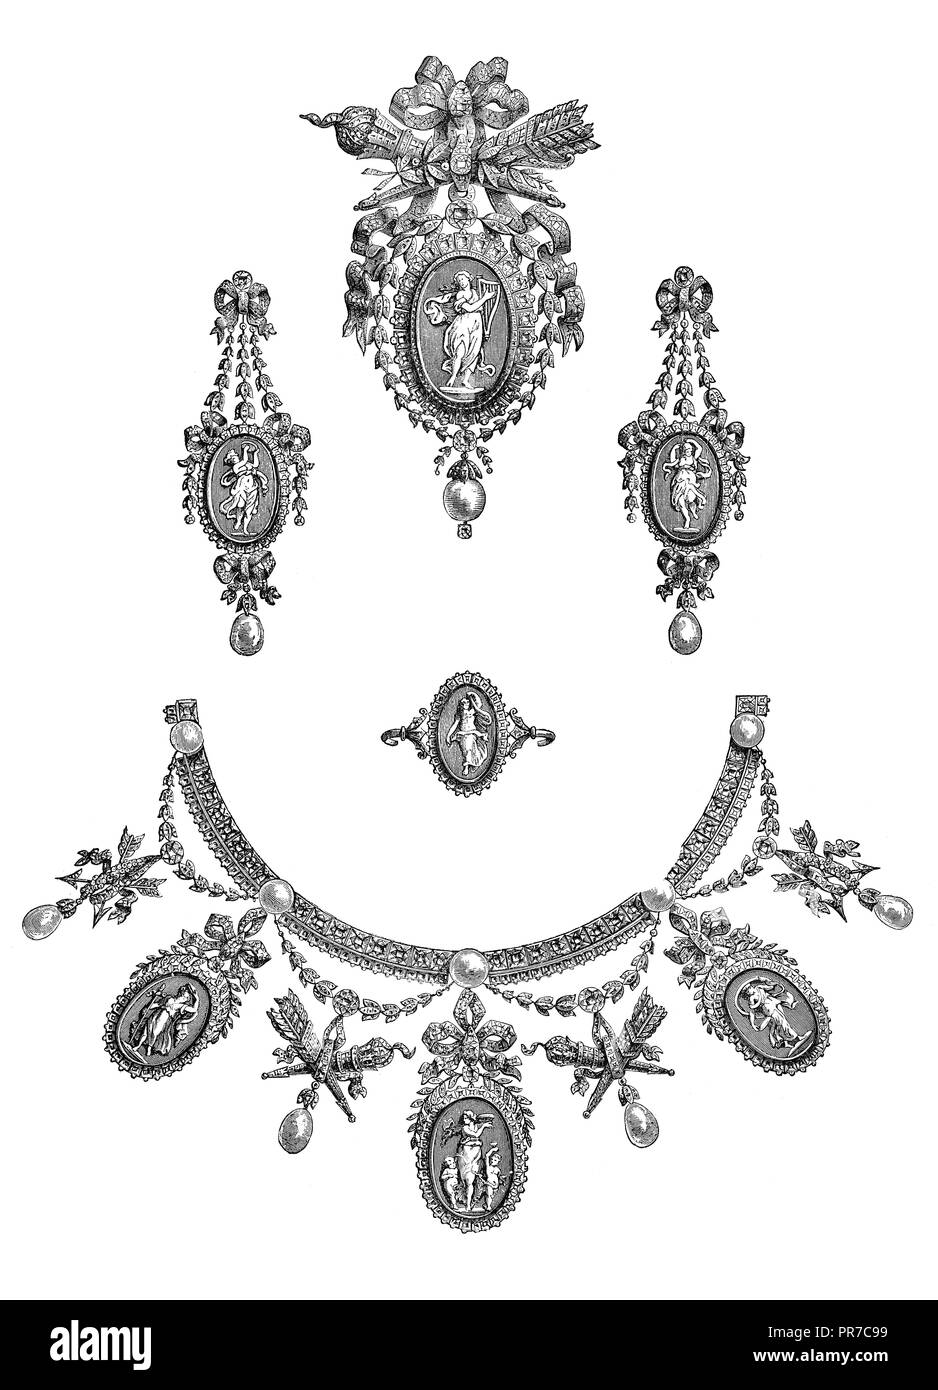 19th century illustration - Gems of industrial art. Parure (Louis XVI.), by Boucheron. Published in 'The Practical Magazine, an Illustrated Cyclopedia Stock Photo